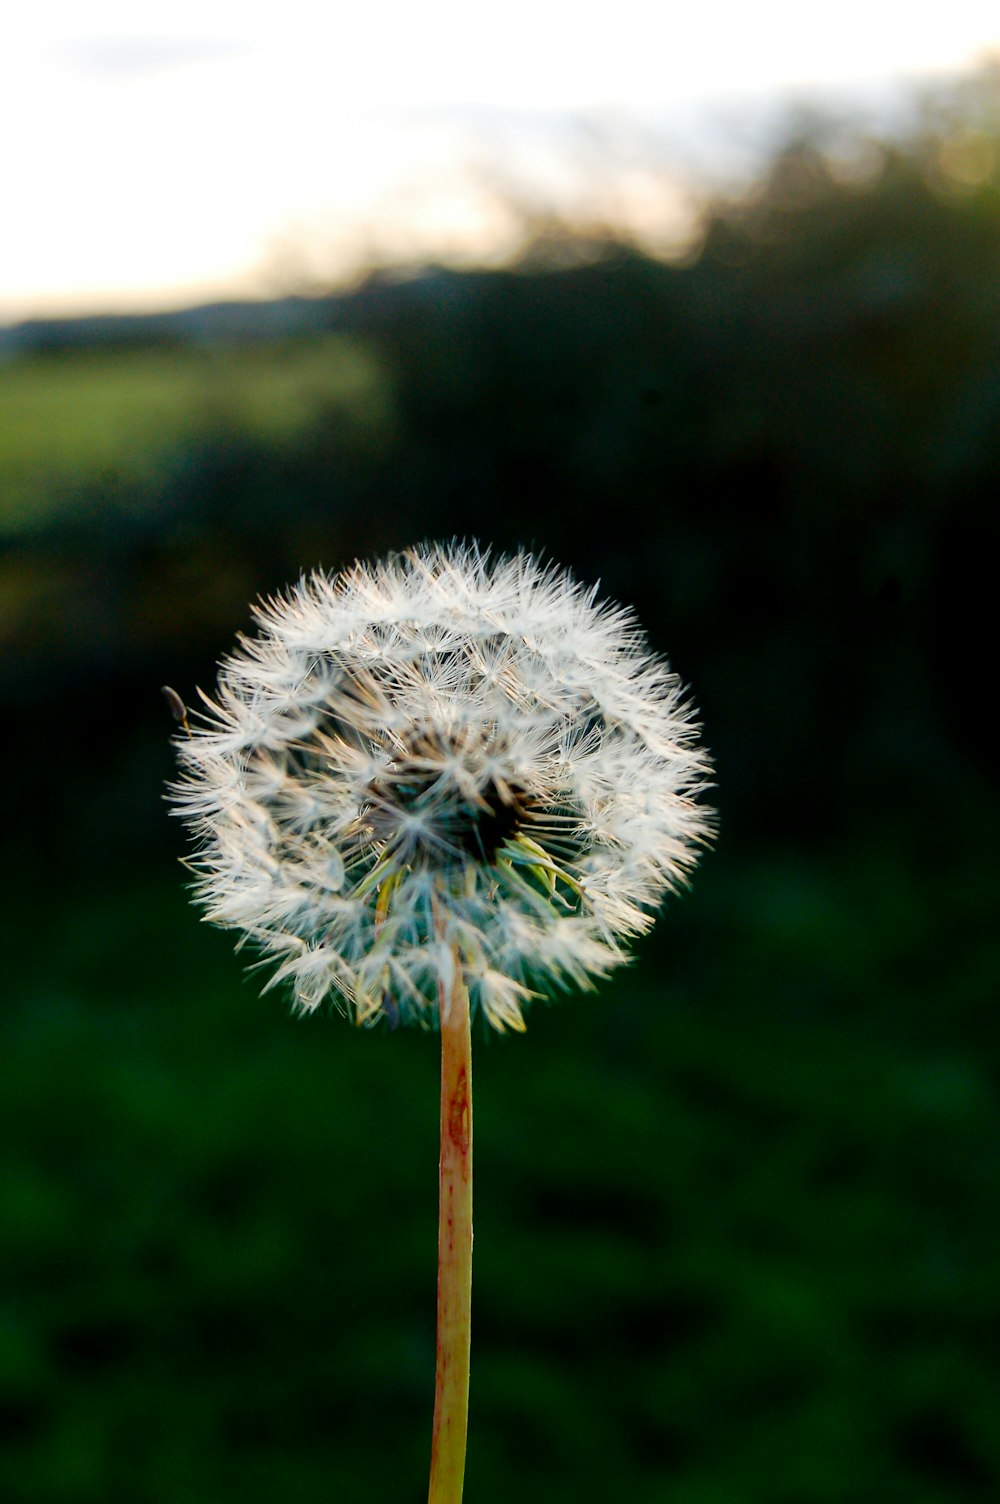 a dandelion with a blurry background in the foreground